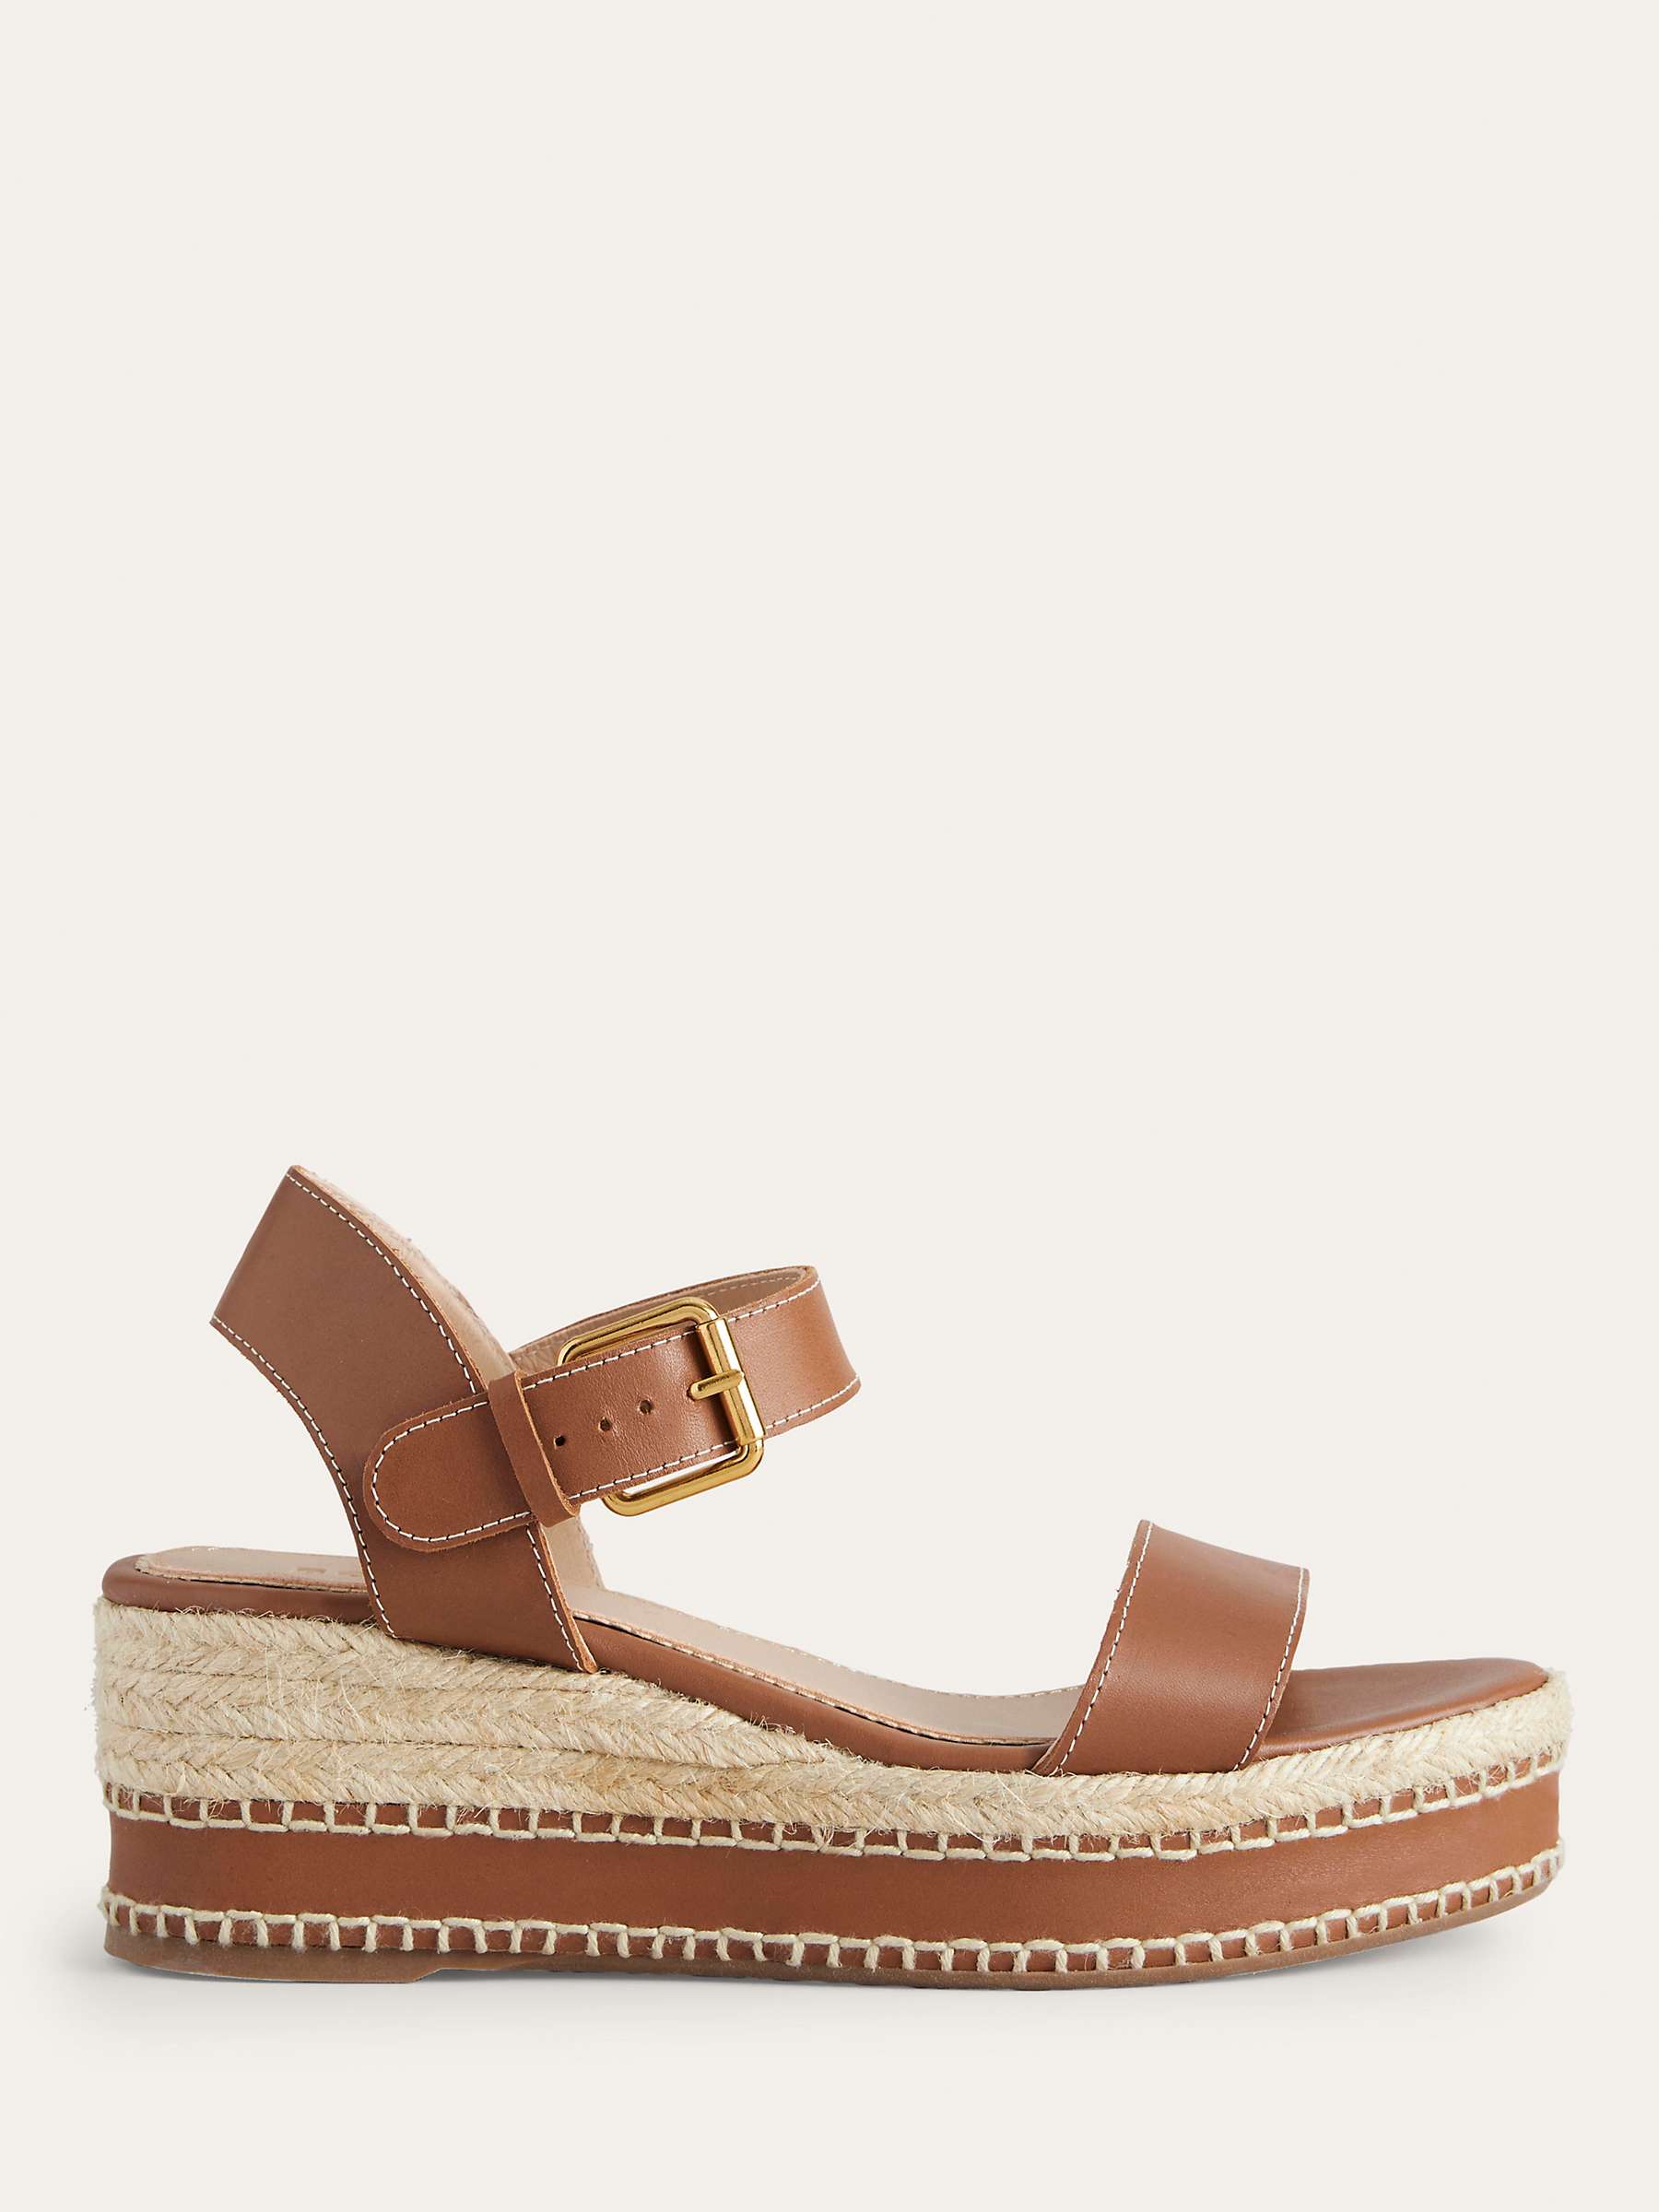 Buy Boden Leather Stitched Wedge Heel Sandals Online at johnlewis.com